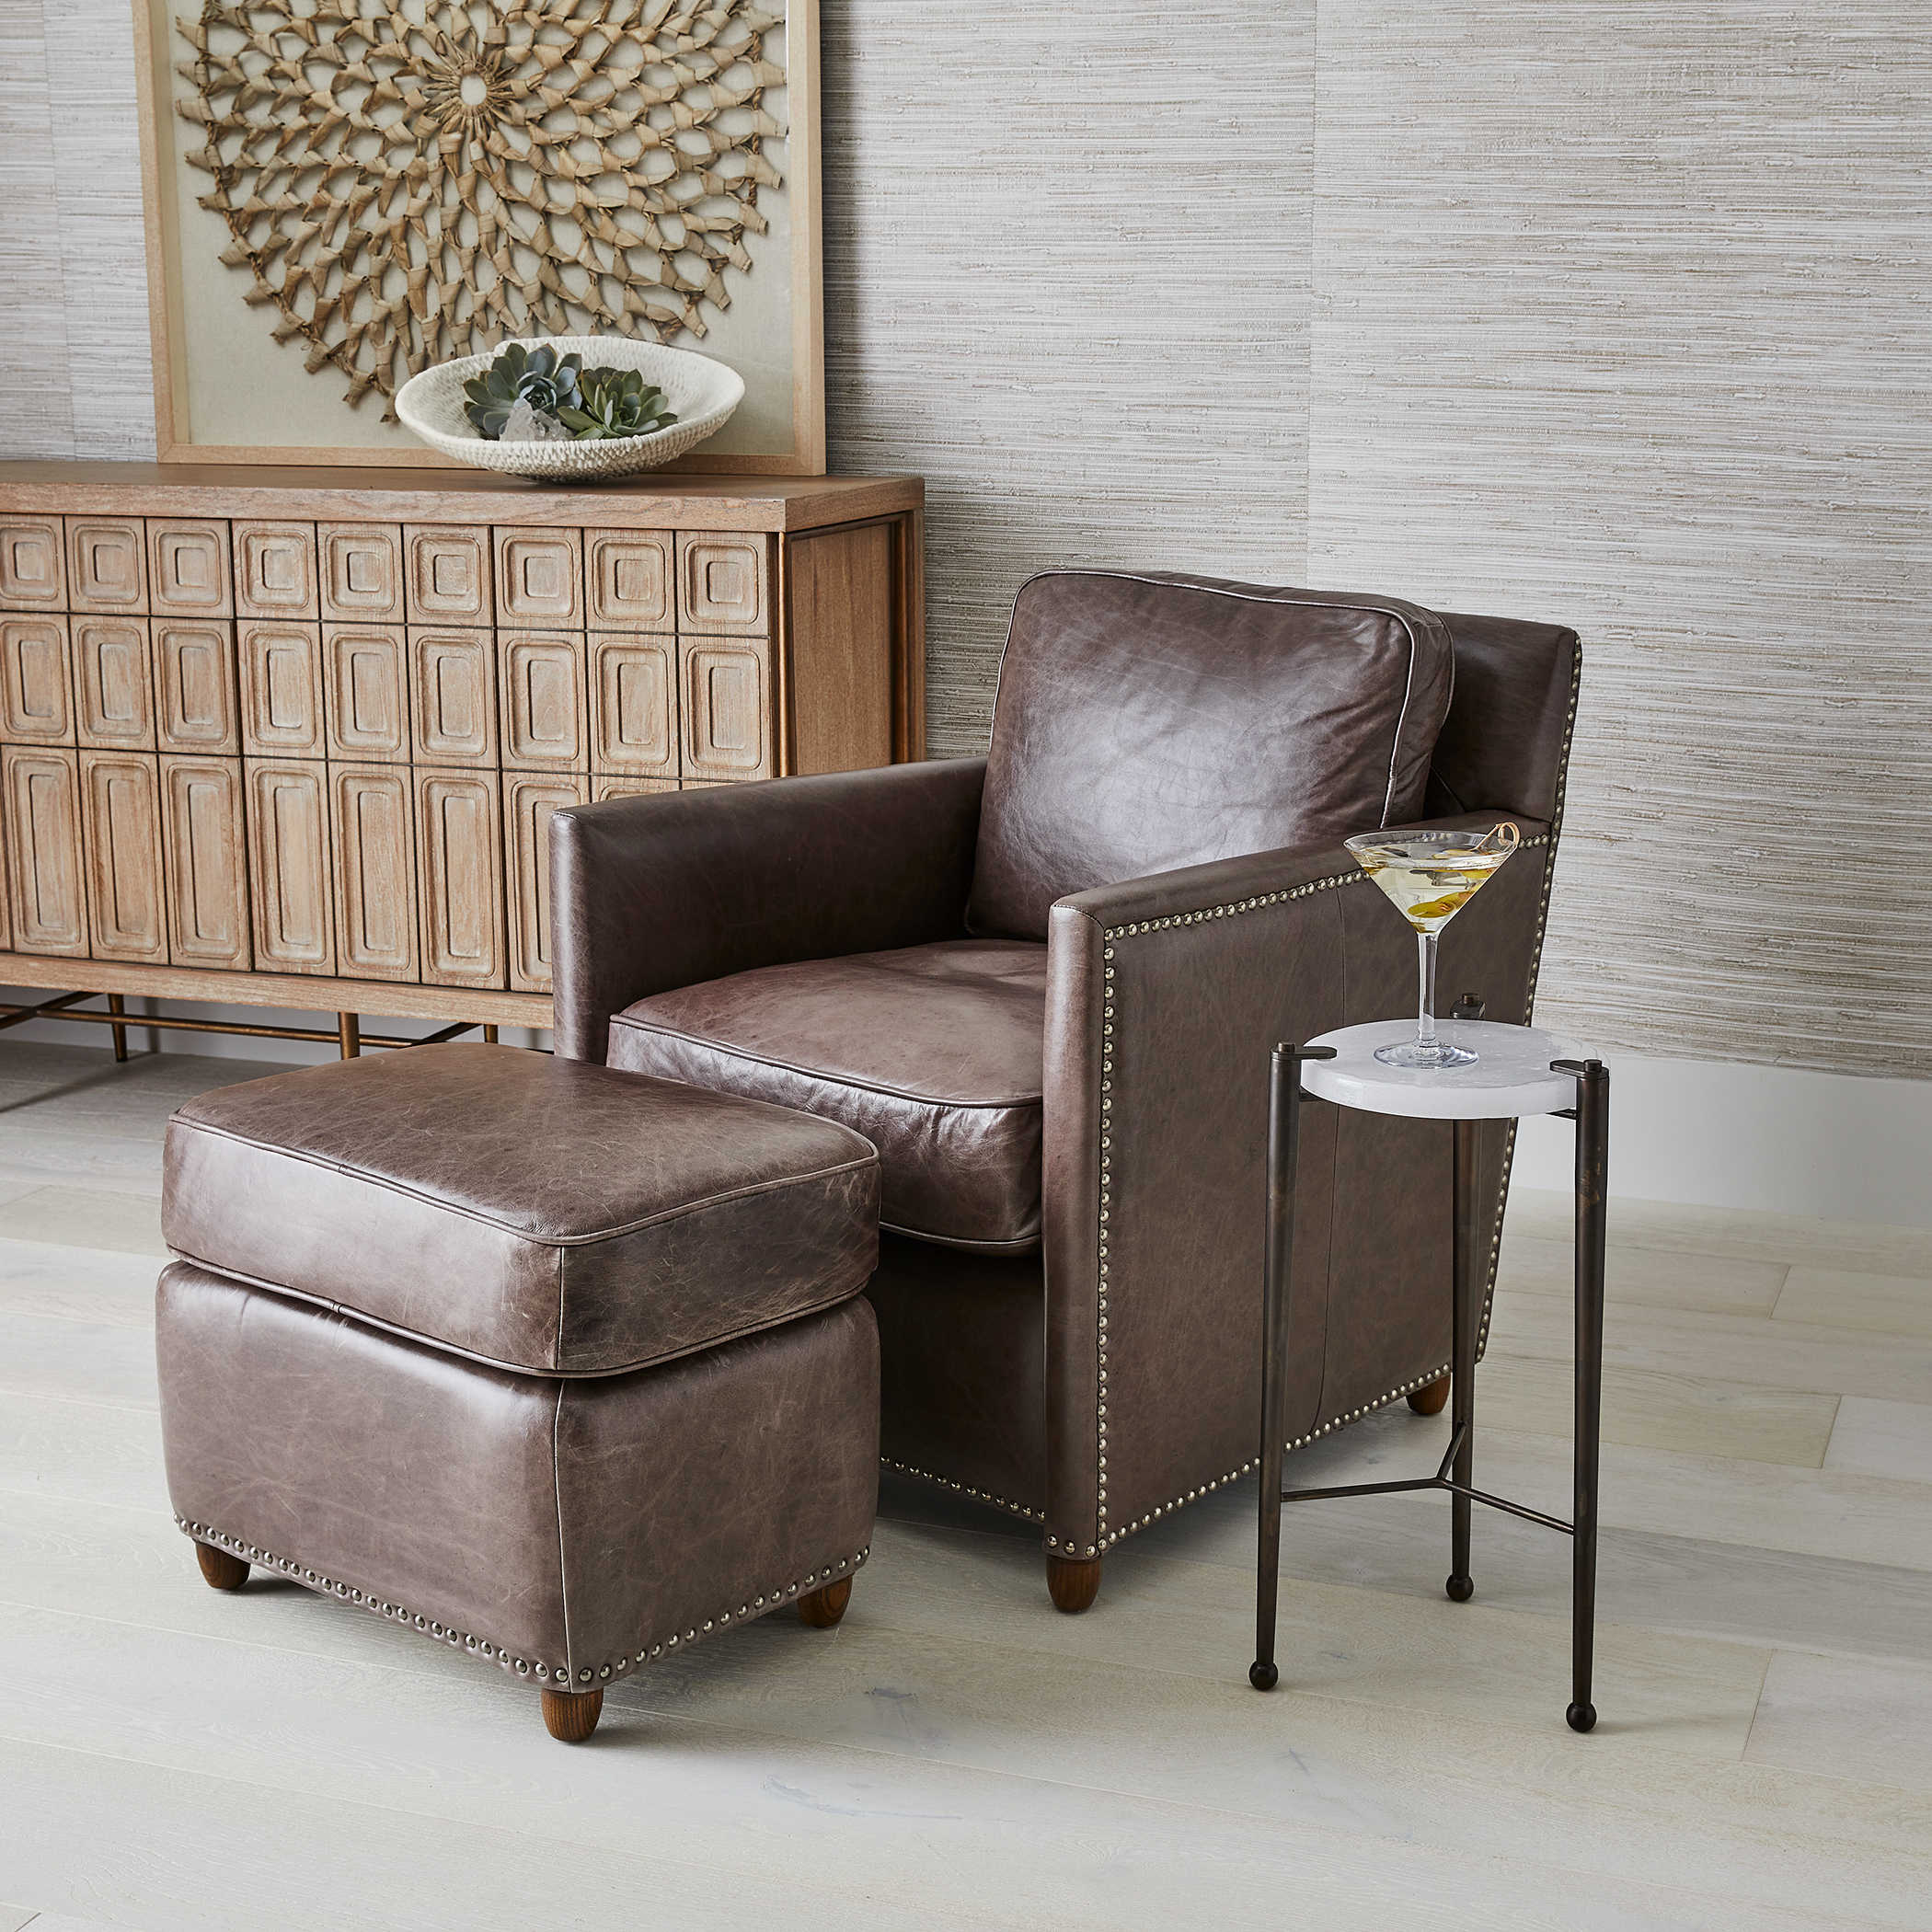 Roosevelt Club Chair Smoke Uttermost, Gray Leather Club Chair